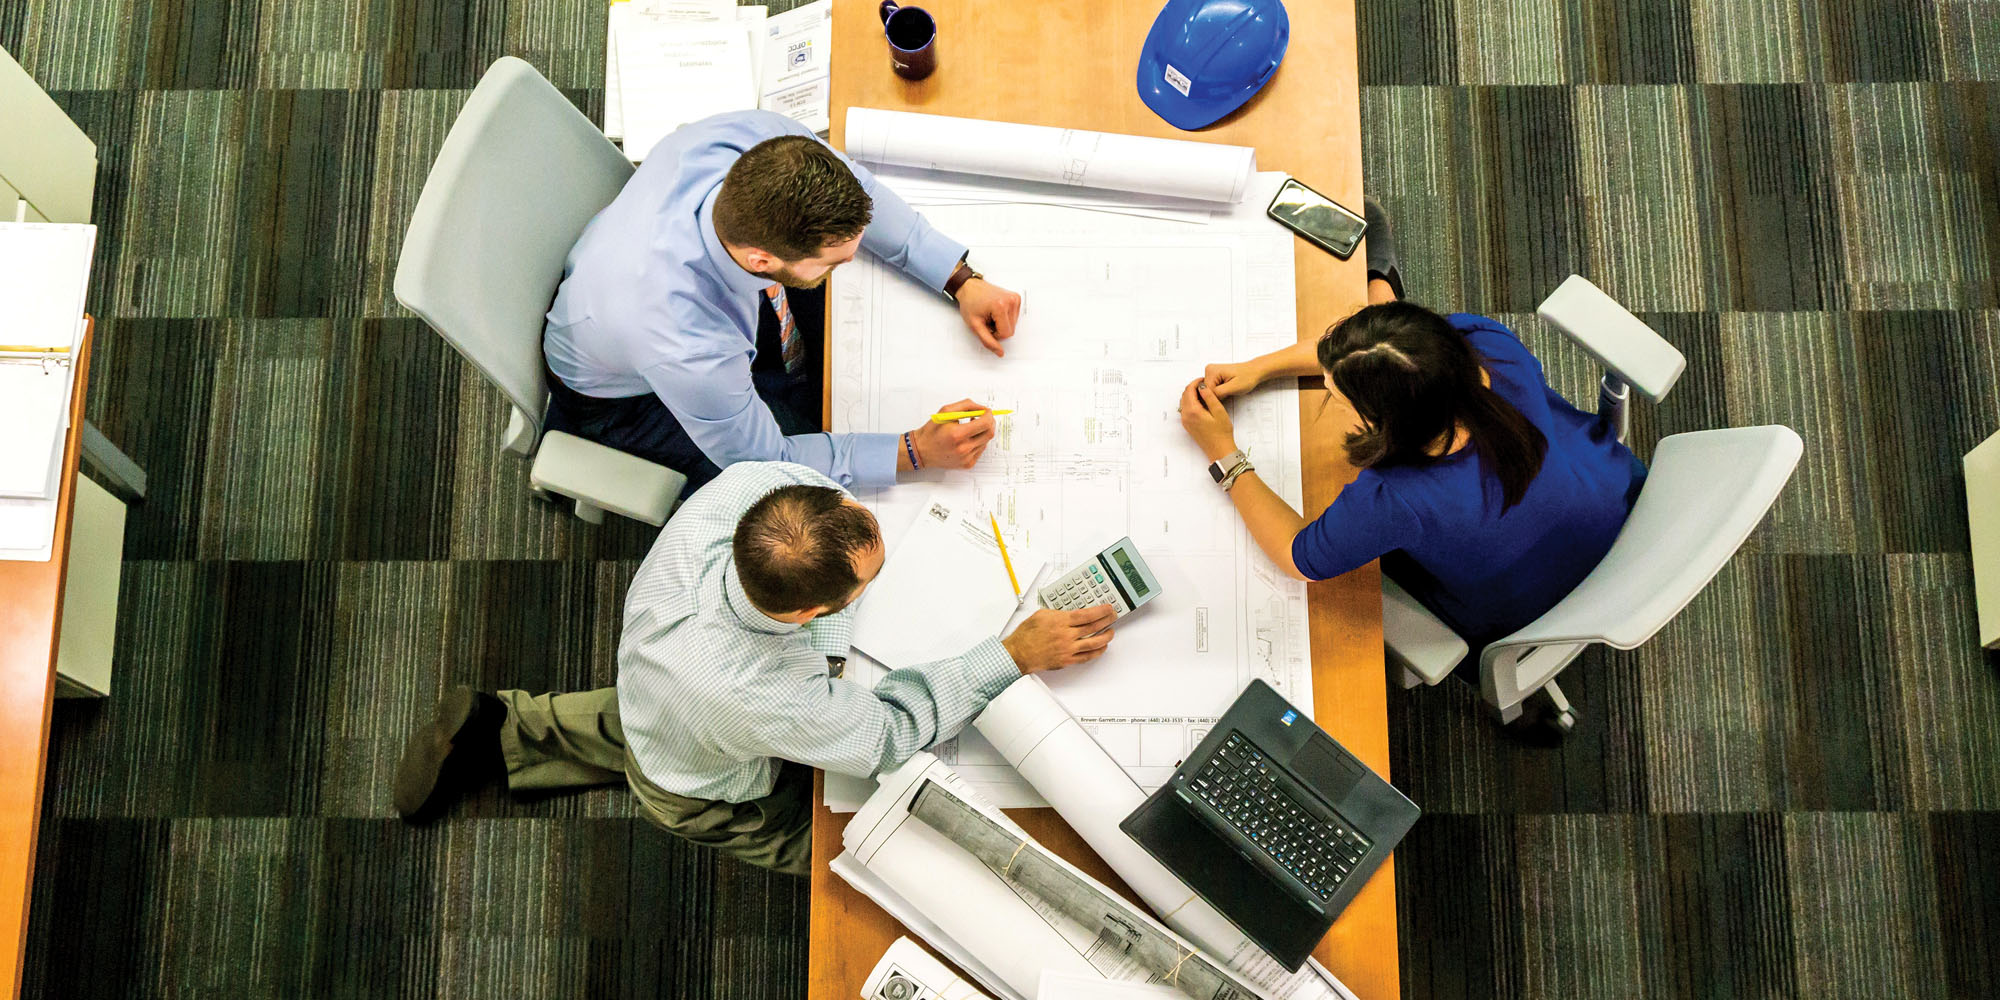 Value Engineering Should Empower Project Teams to Optimize Designs by Examining All Functions and their Associated Costs